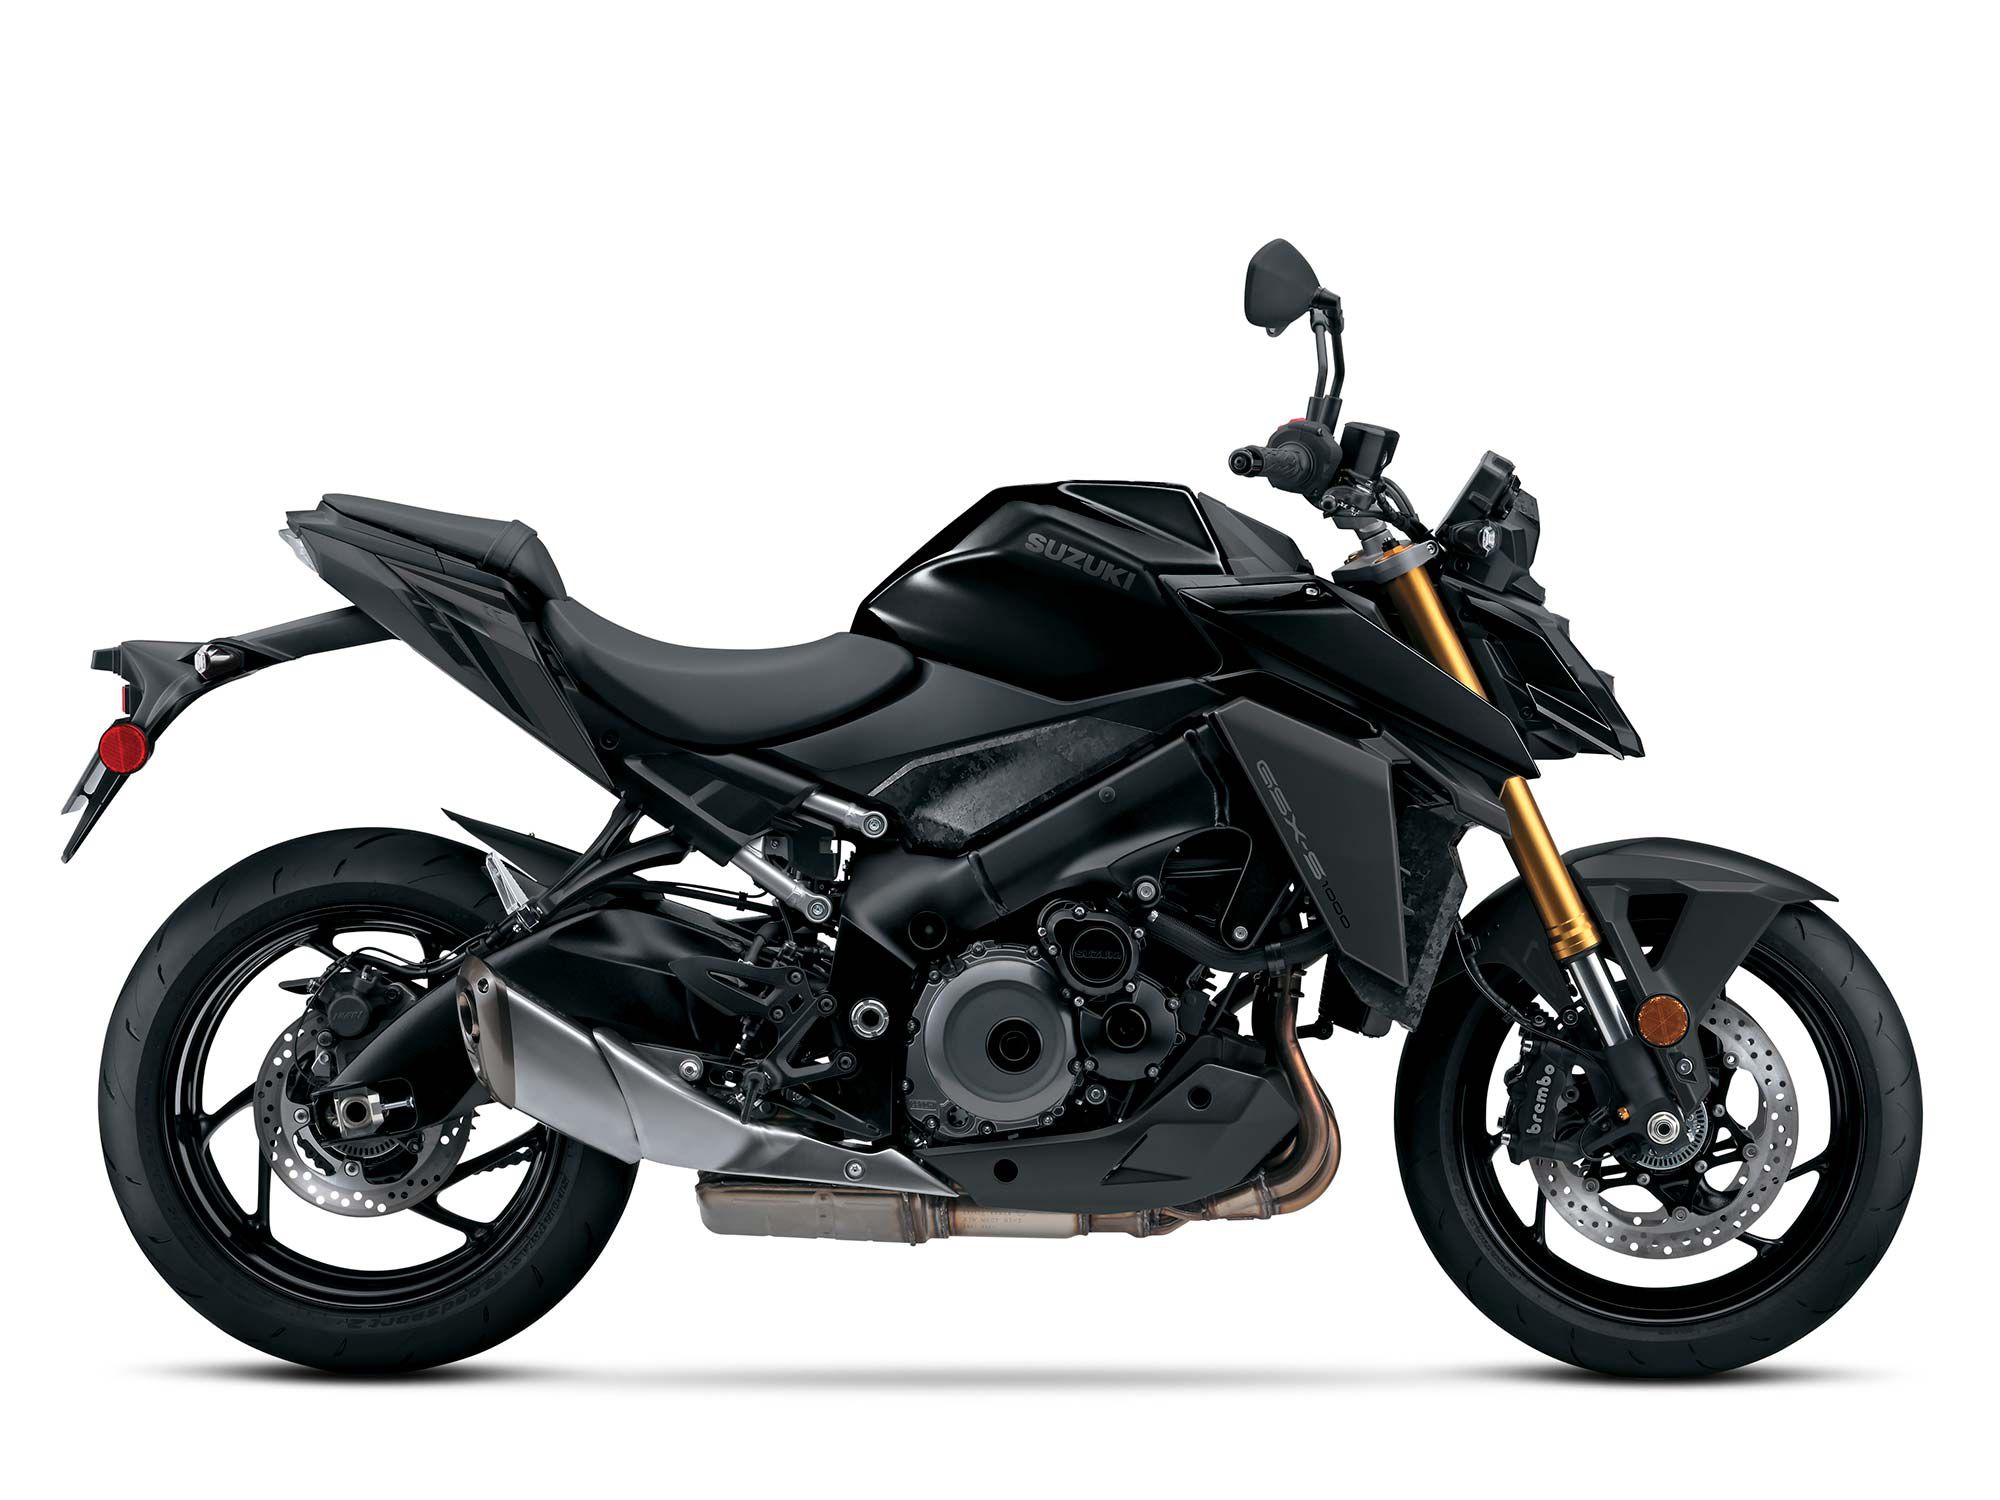 Pricing for the new 2023 Suzuki GSX-S1000 will start at $11,499.